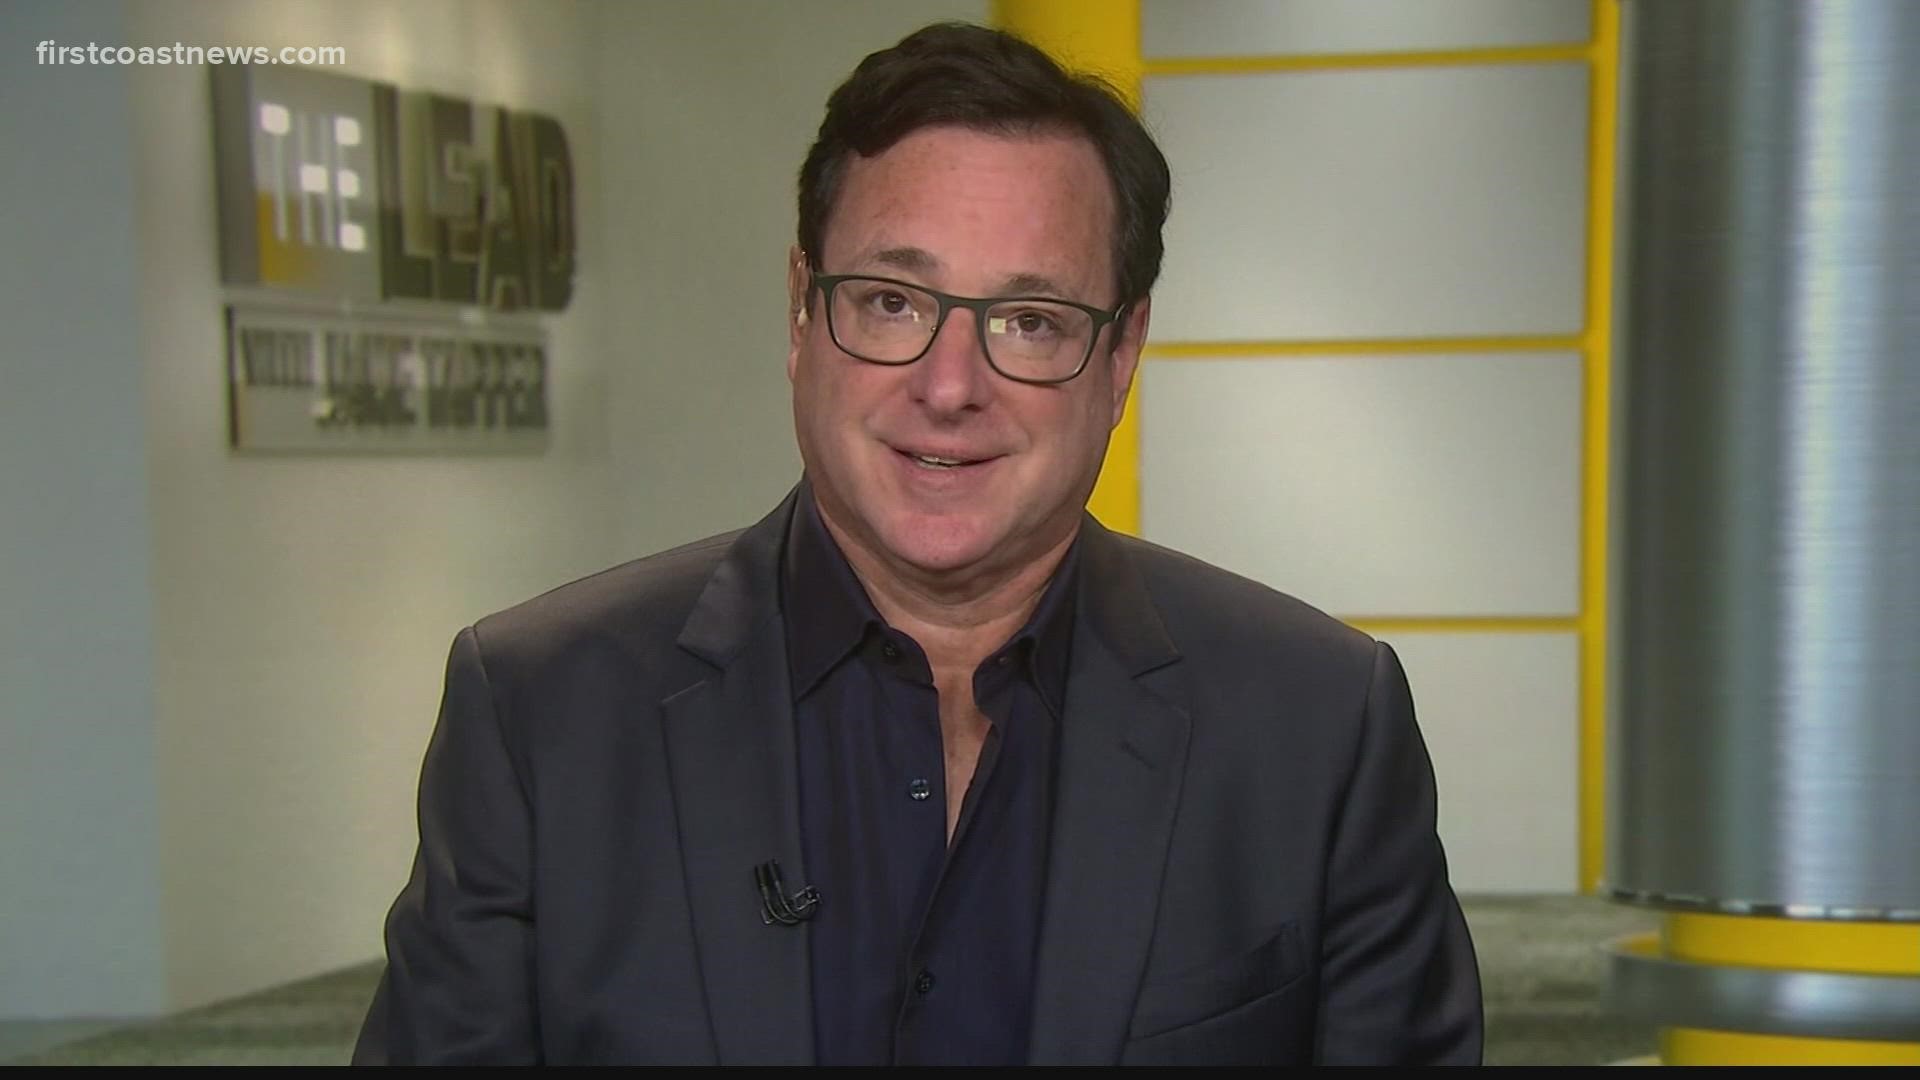 Saget, best known for his role on "Full House", took the stage for the last time on January 8 in Ponte Vedra Beach.